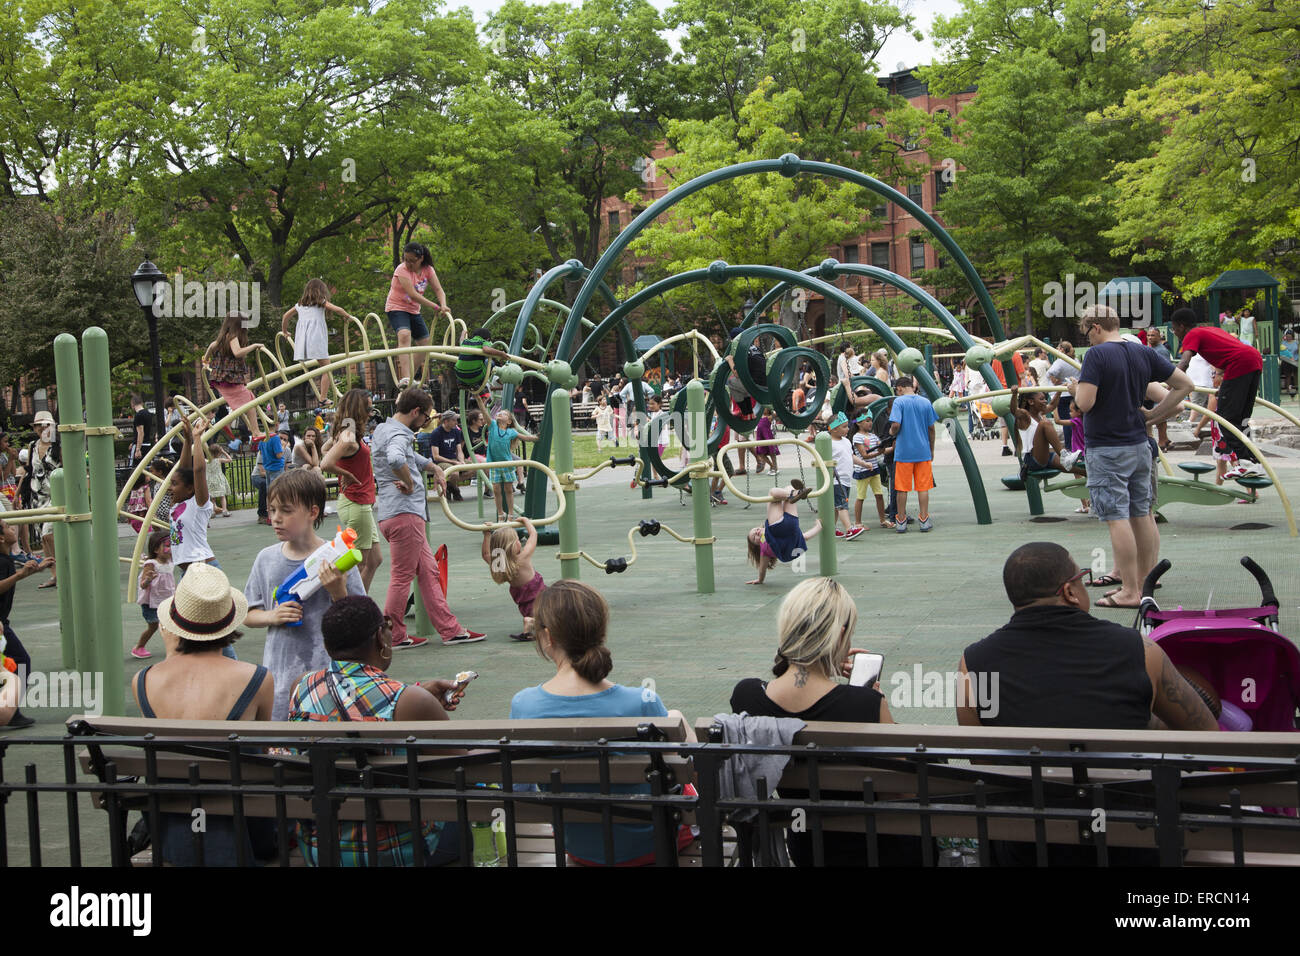 Neighborhood playground is crowded with families and kids on a warm spring day in Park Slope, Brooklyn, NY. Stock Photo